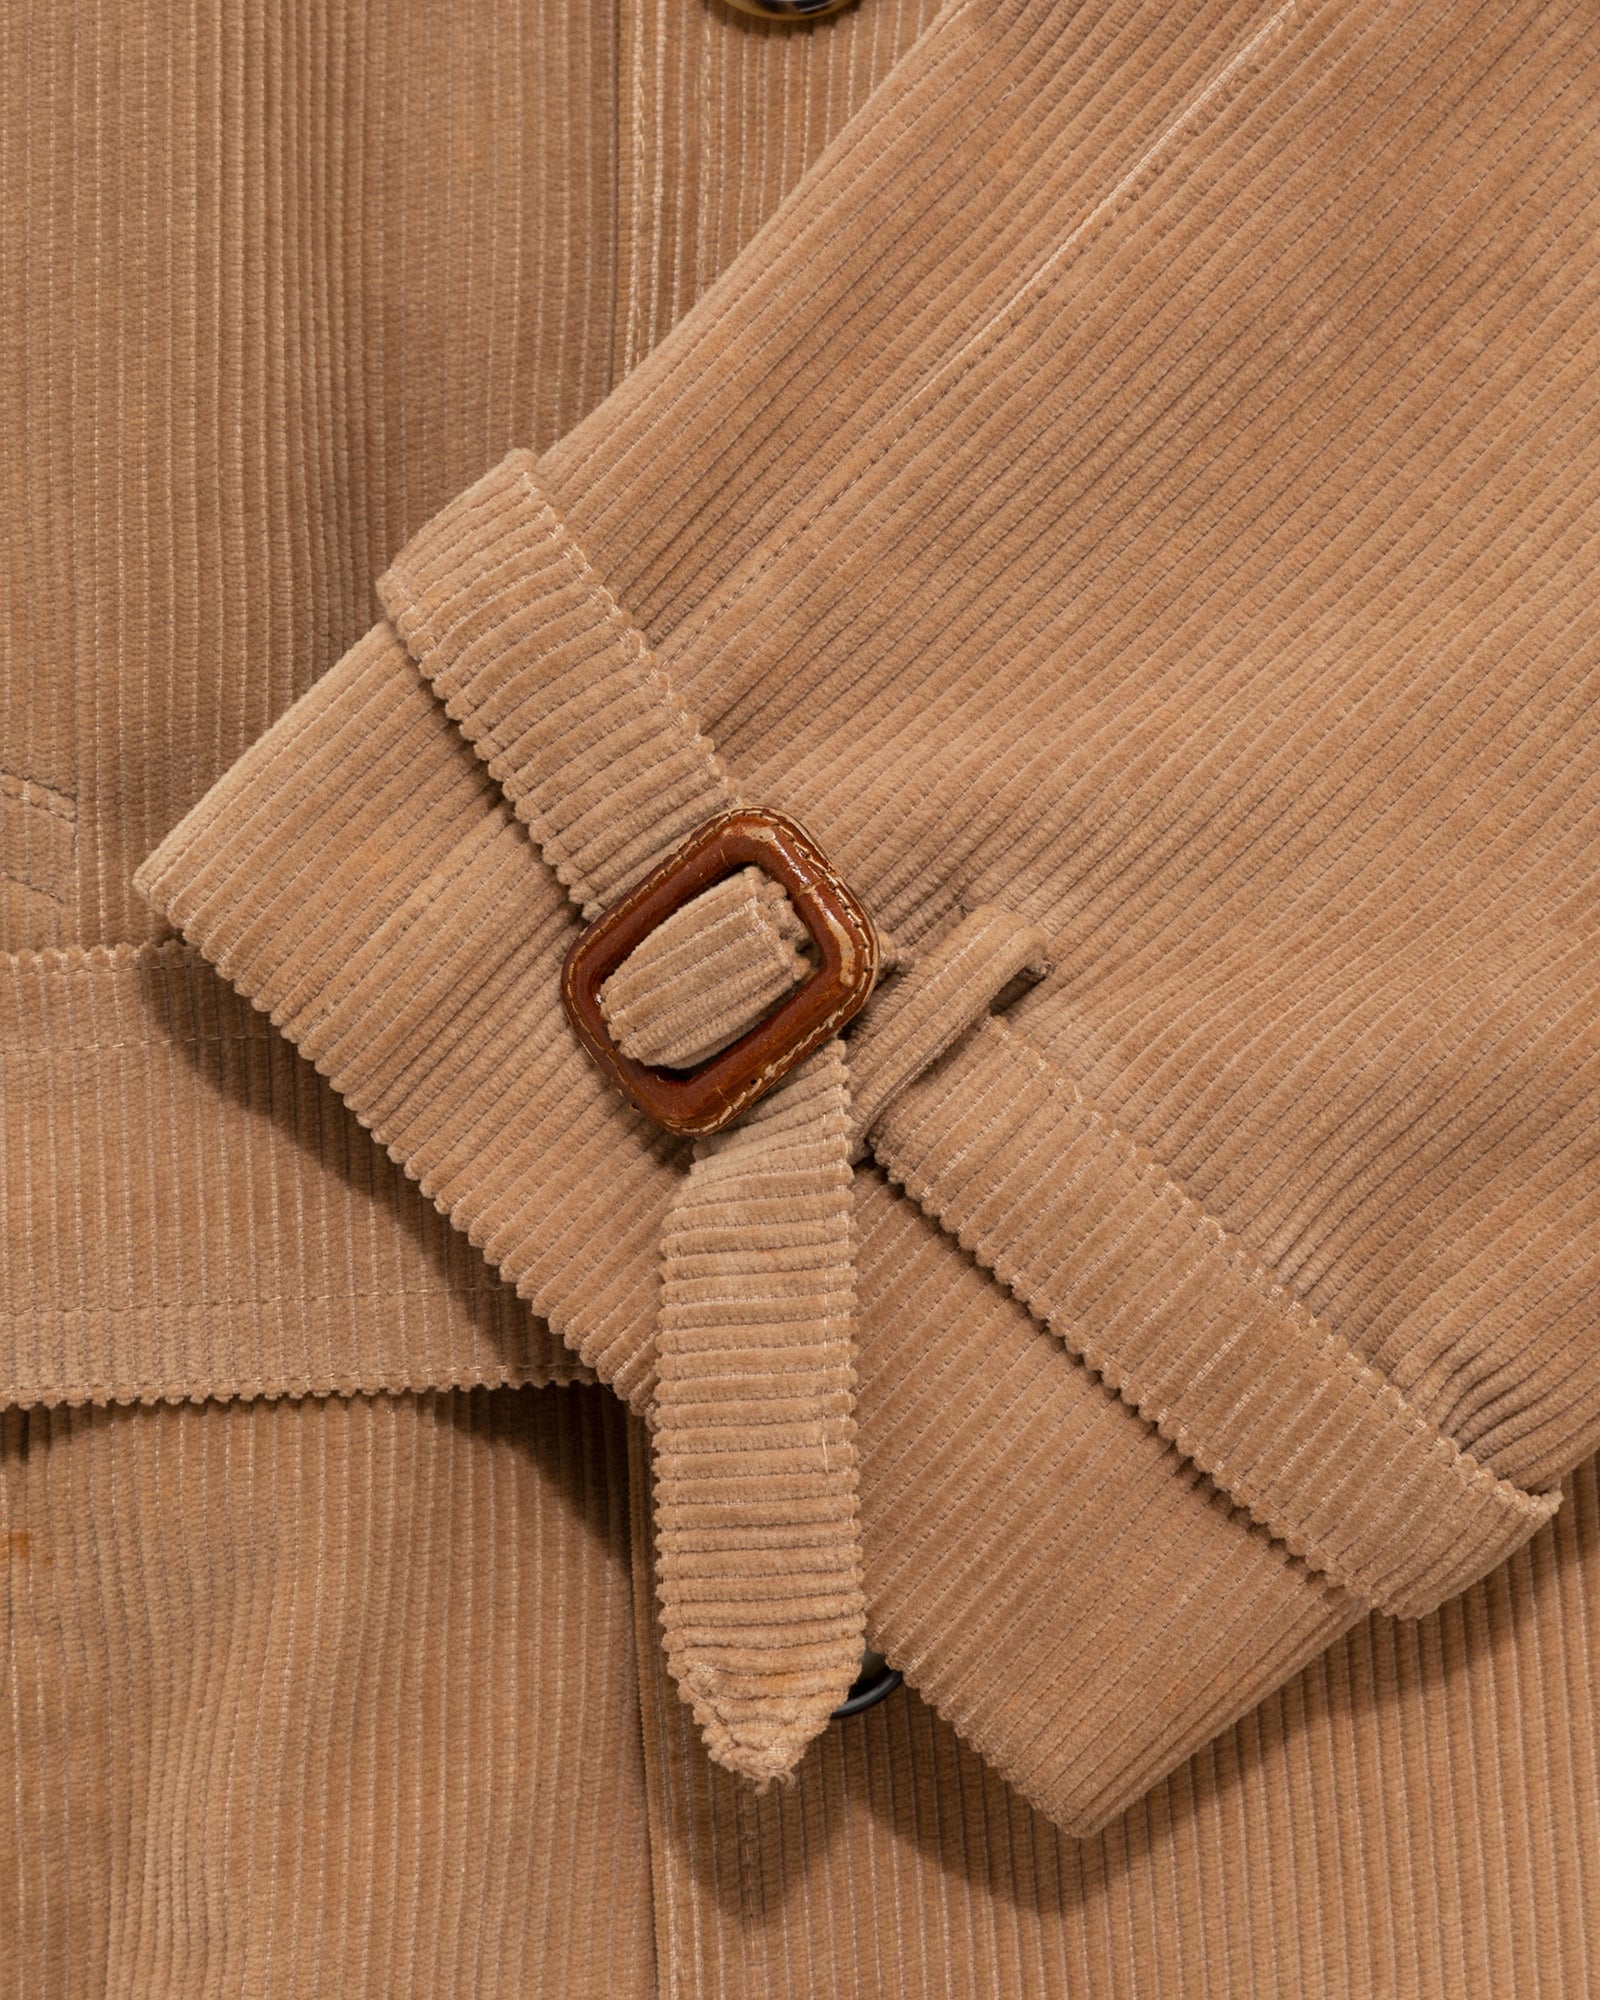 Tailor Made Corduroy Trench Coat